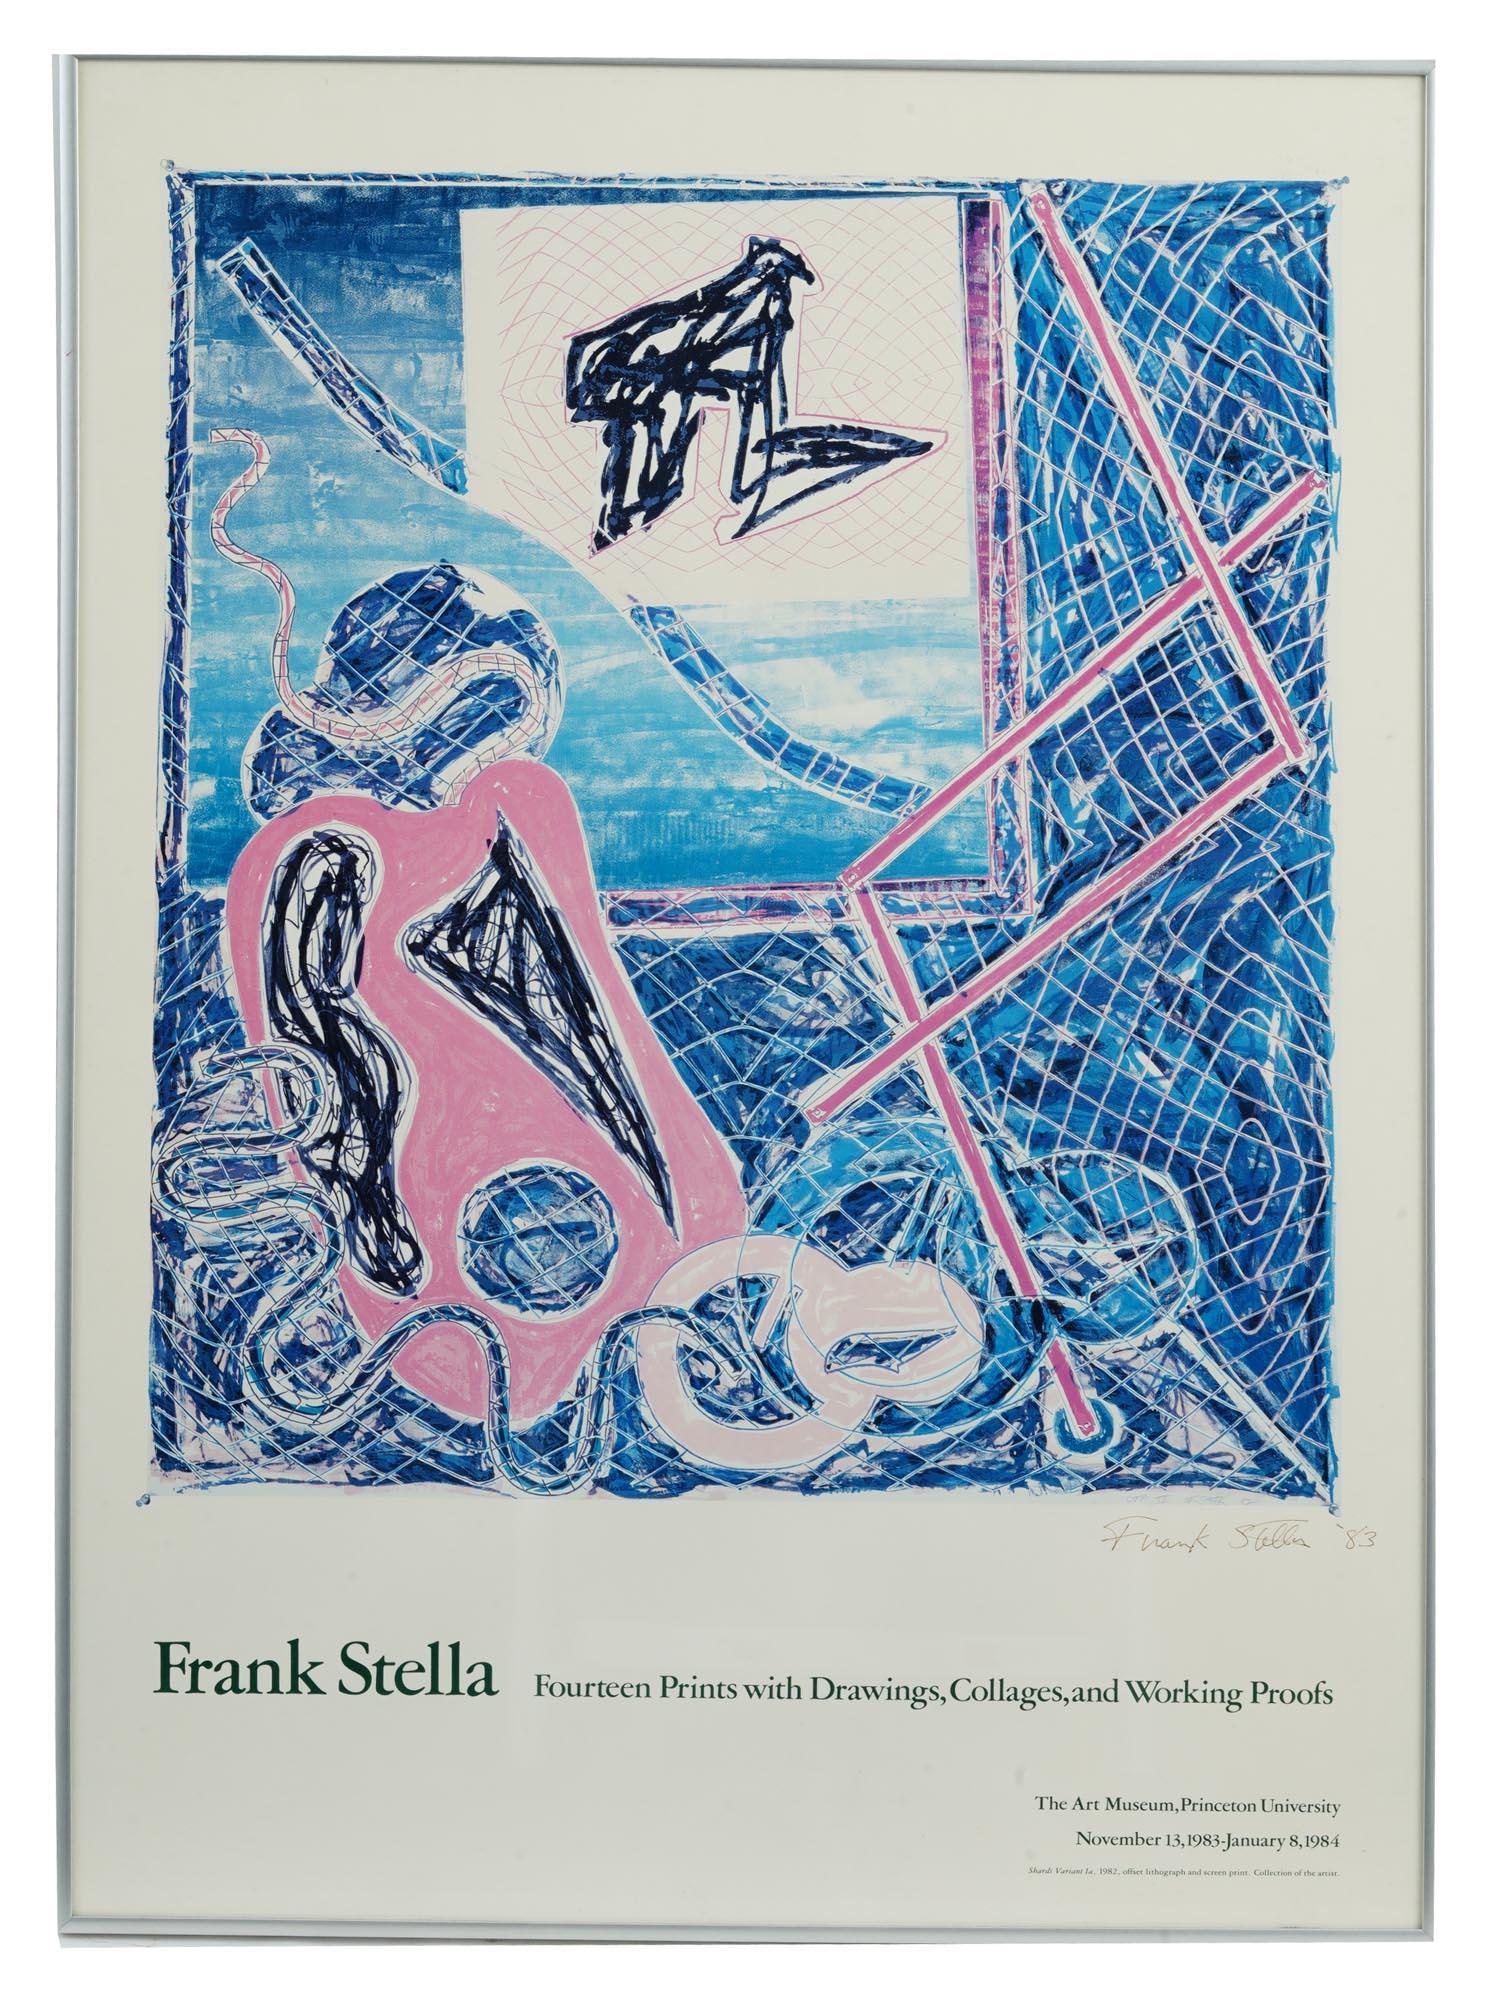 FRANK STELLA SIGNED LITHOGRAPH POSTER